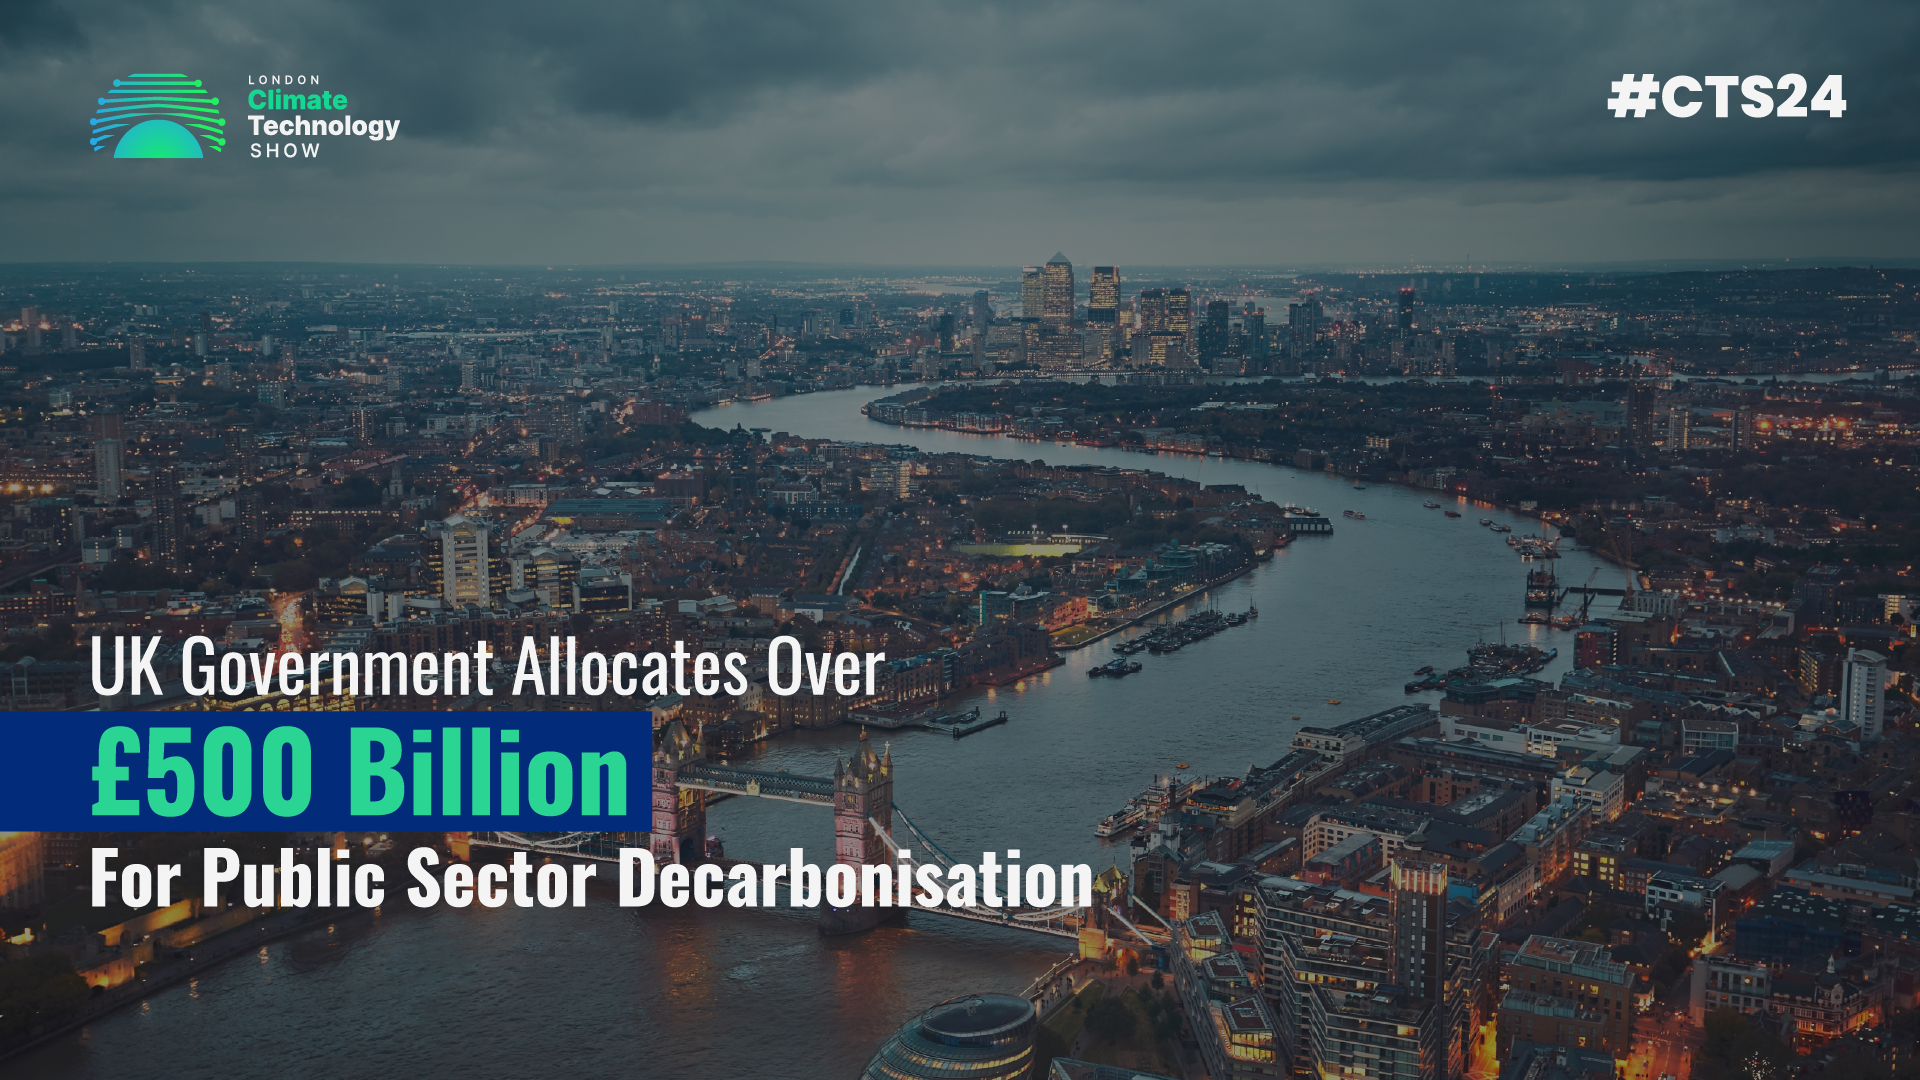 UK Government Allocates over £500 Billion for Public Sector Decarbonisation